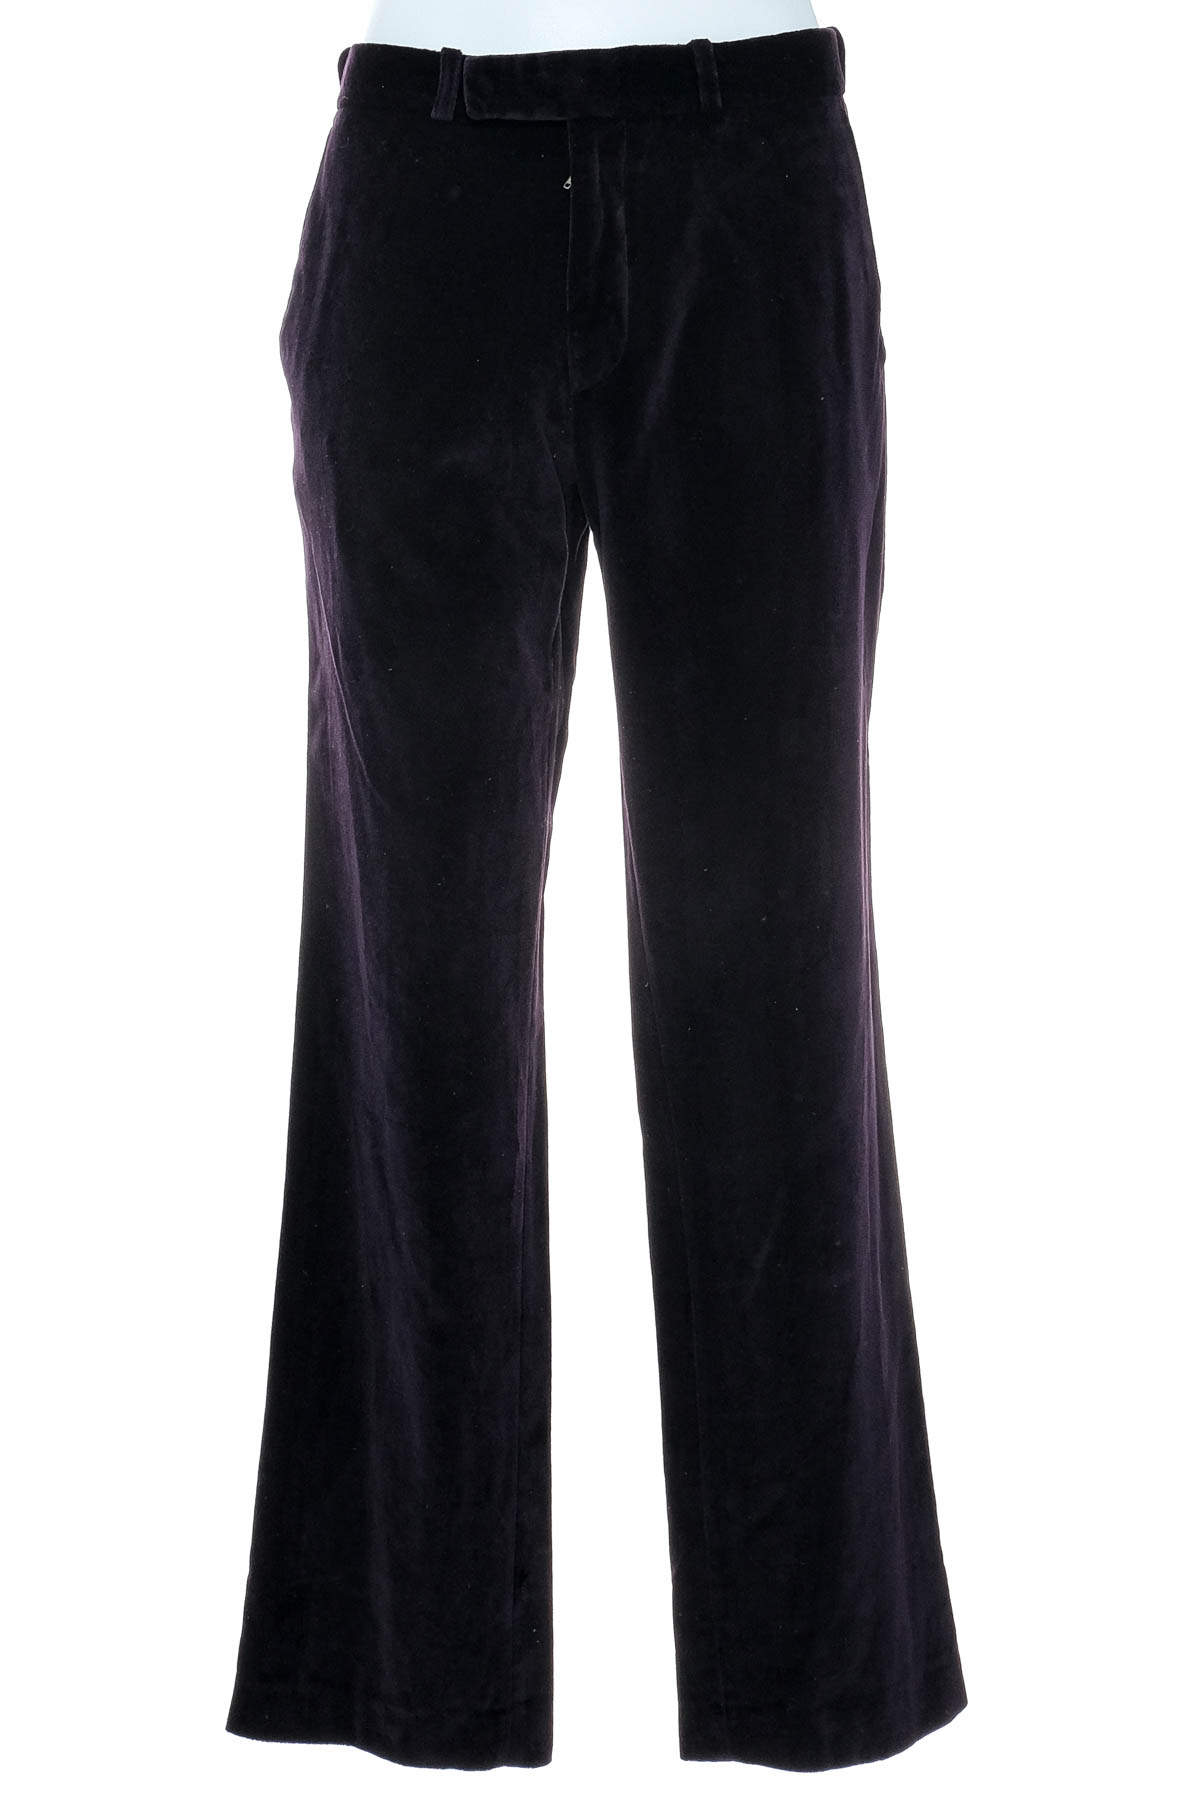 Men's trousers - Conwell - 0